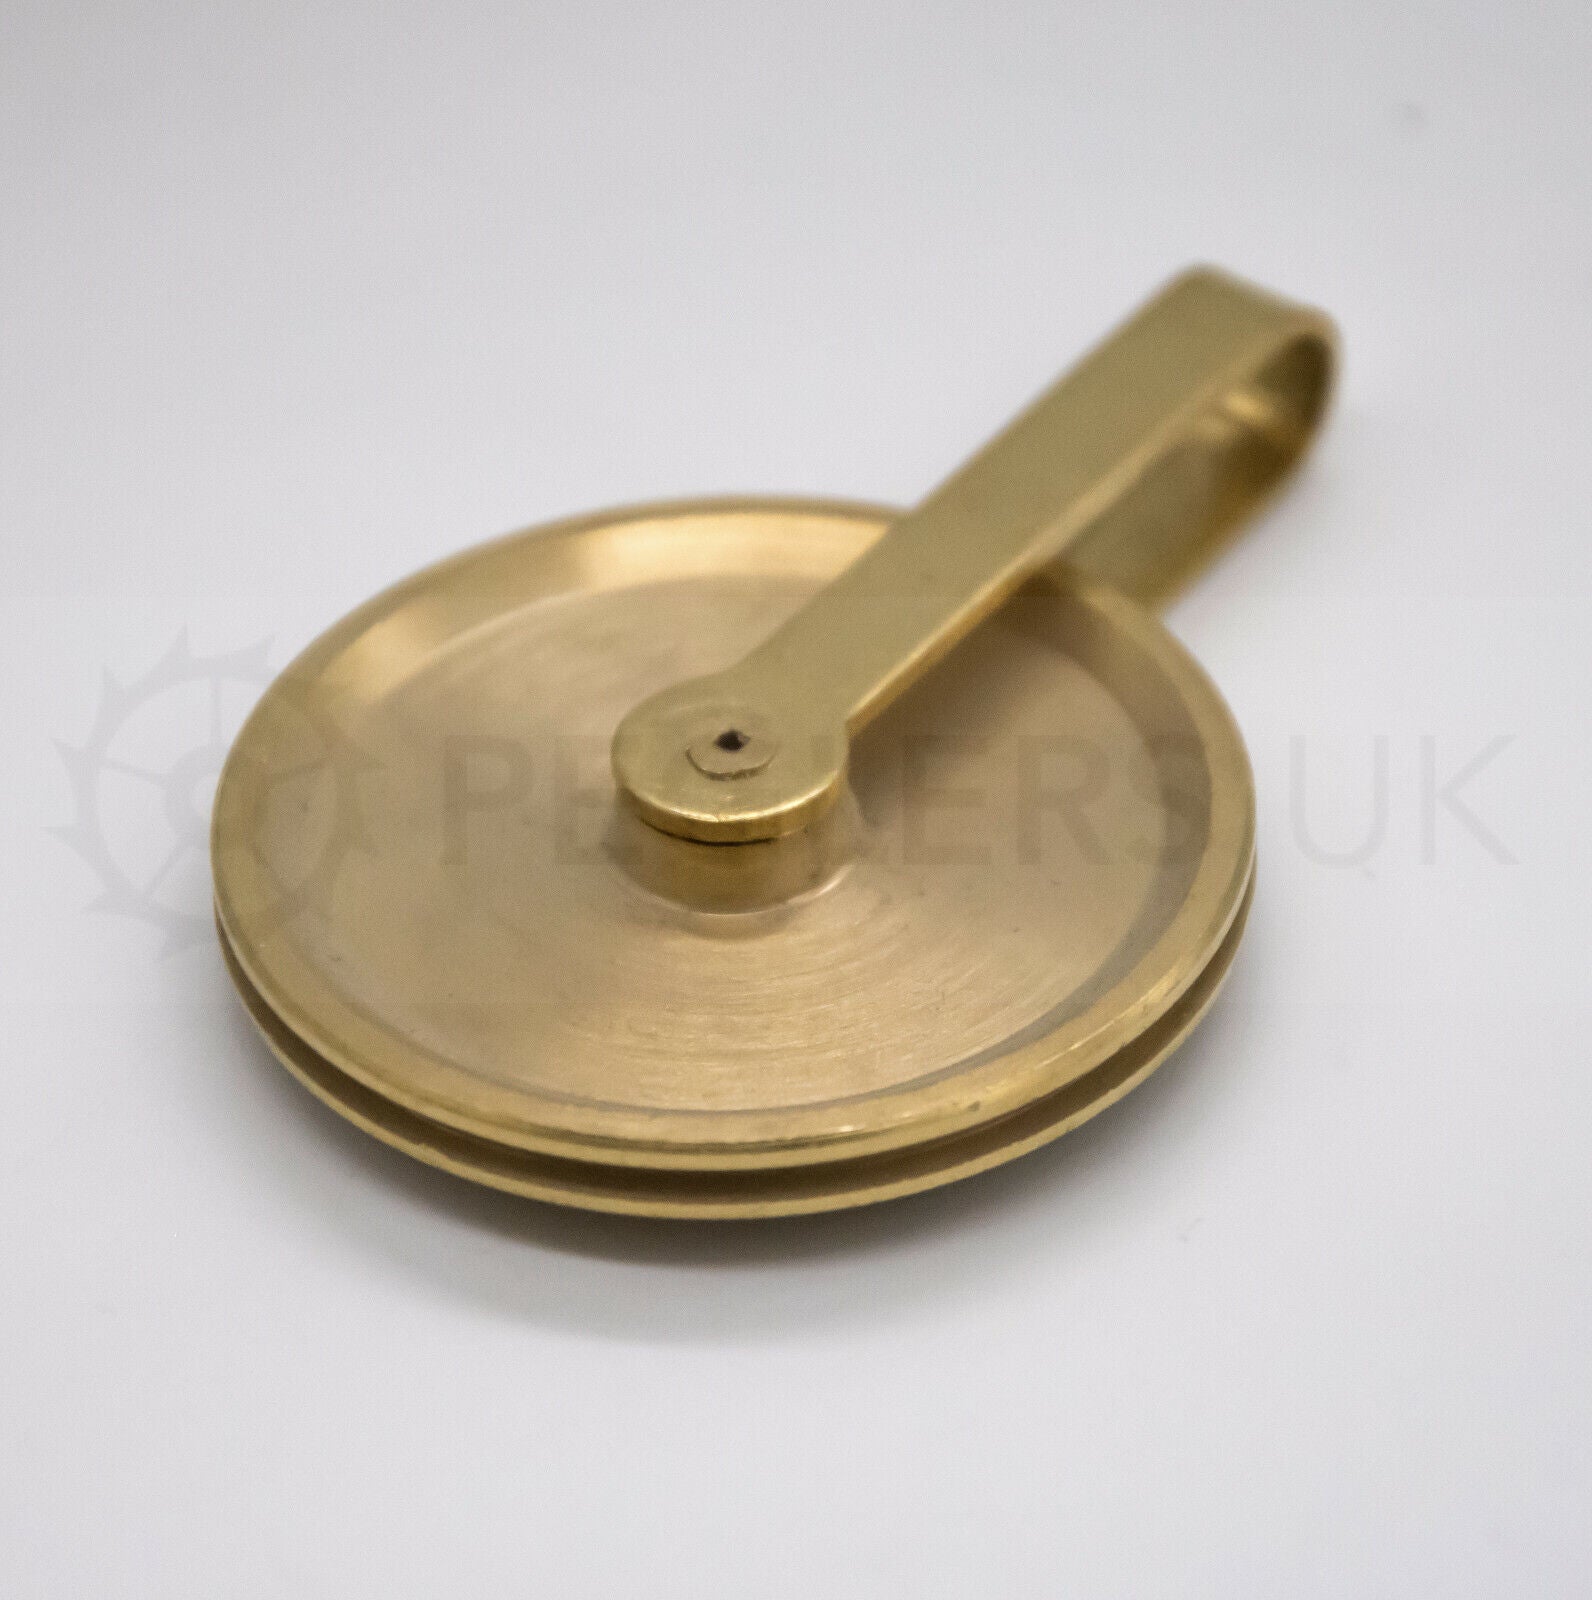 Gut/Cable Pulley for Longcase Clocks - 38mm / 1.5 inch